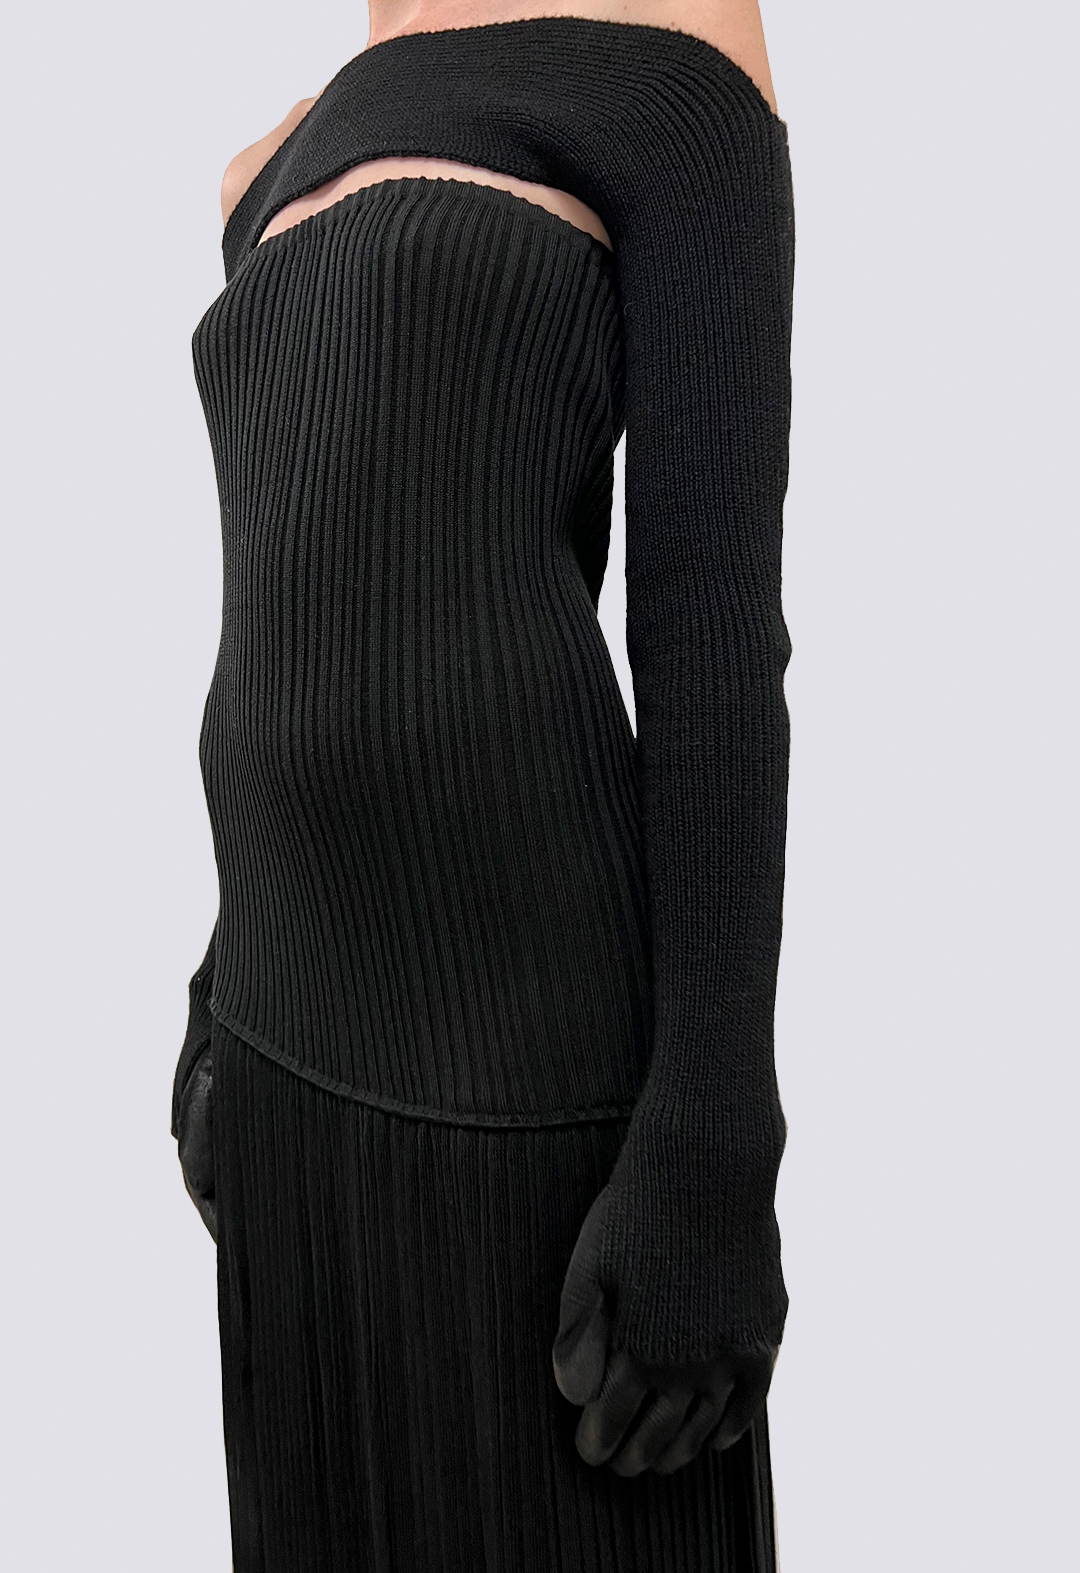 Close-up of black knit top featuring gloves at the end of the sleeve.